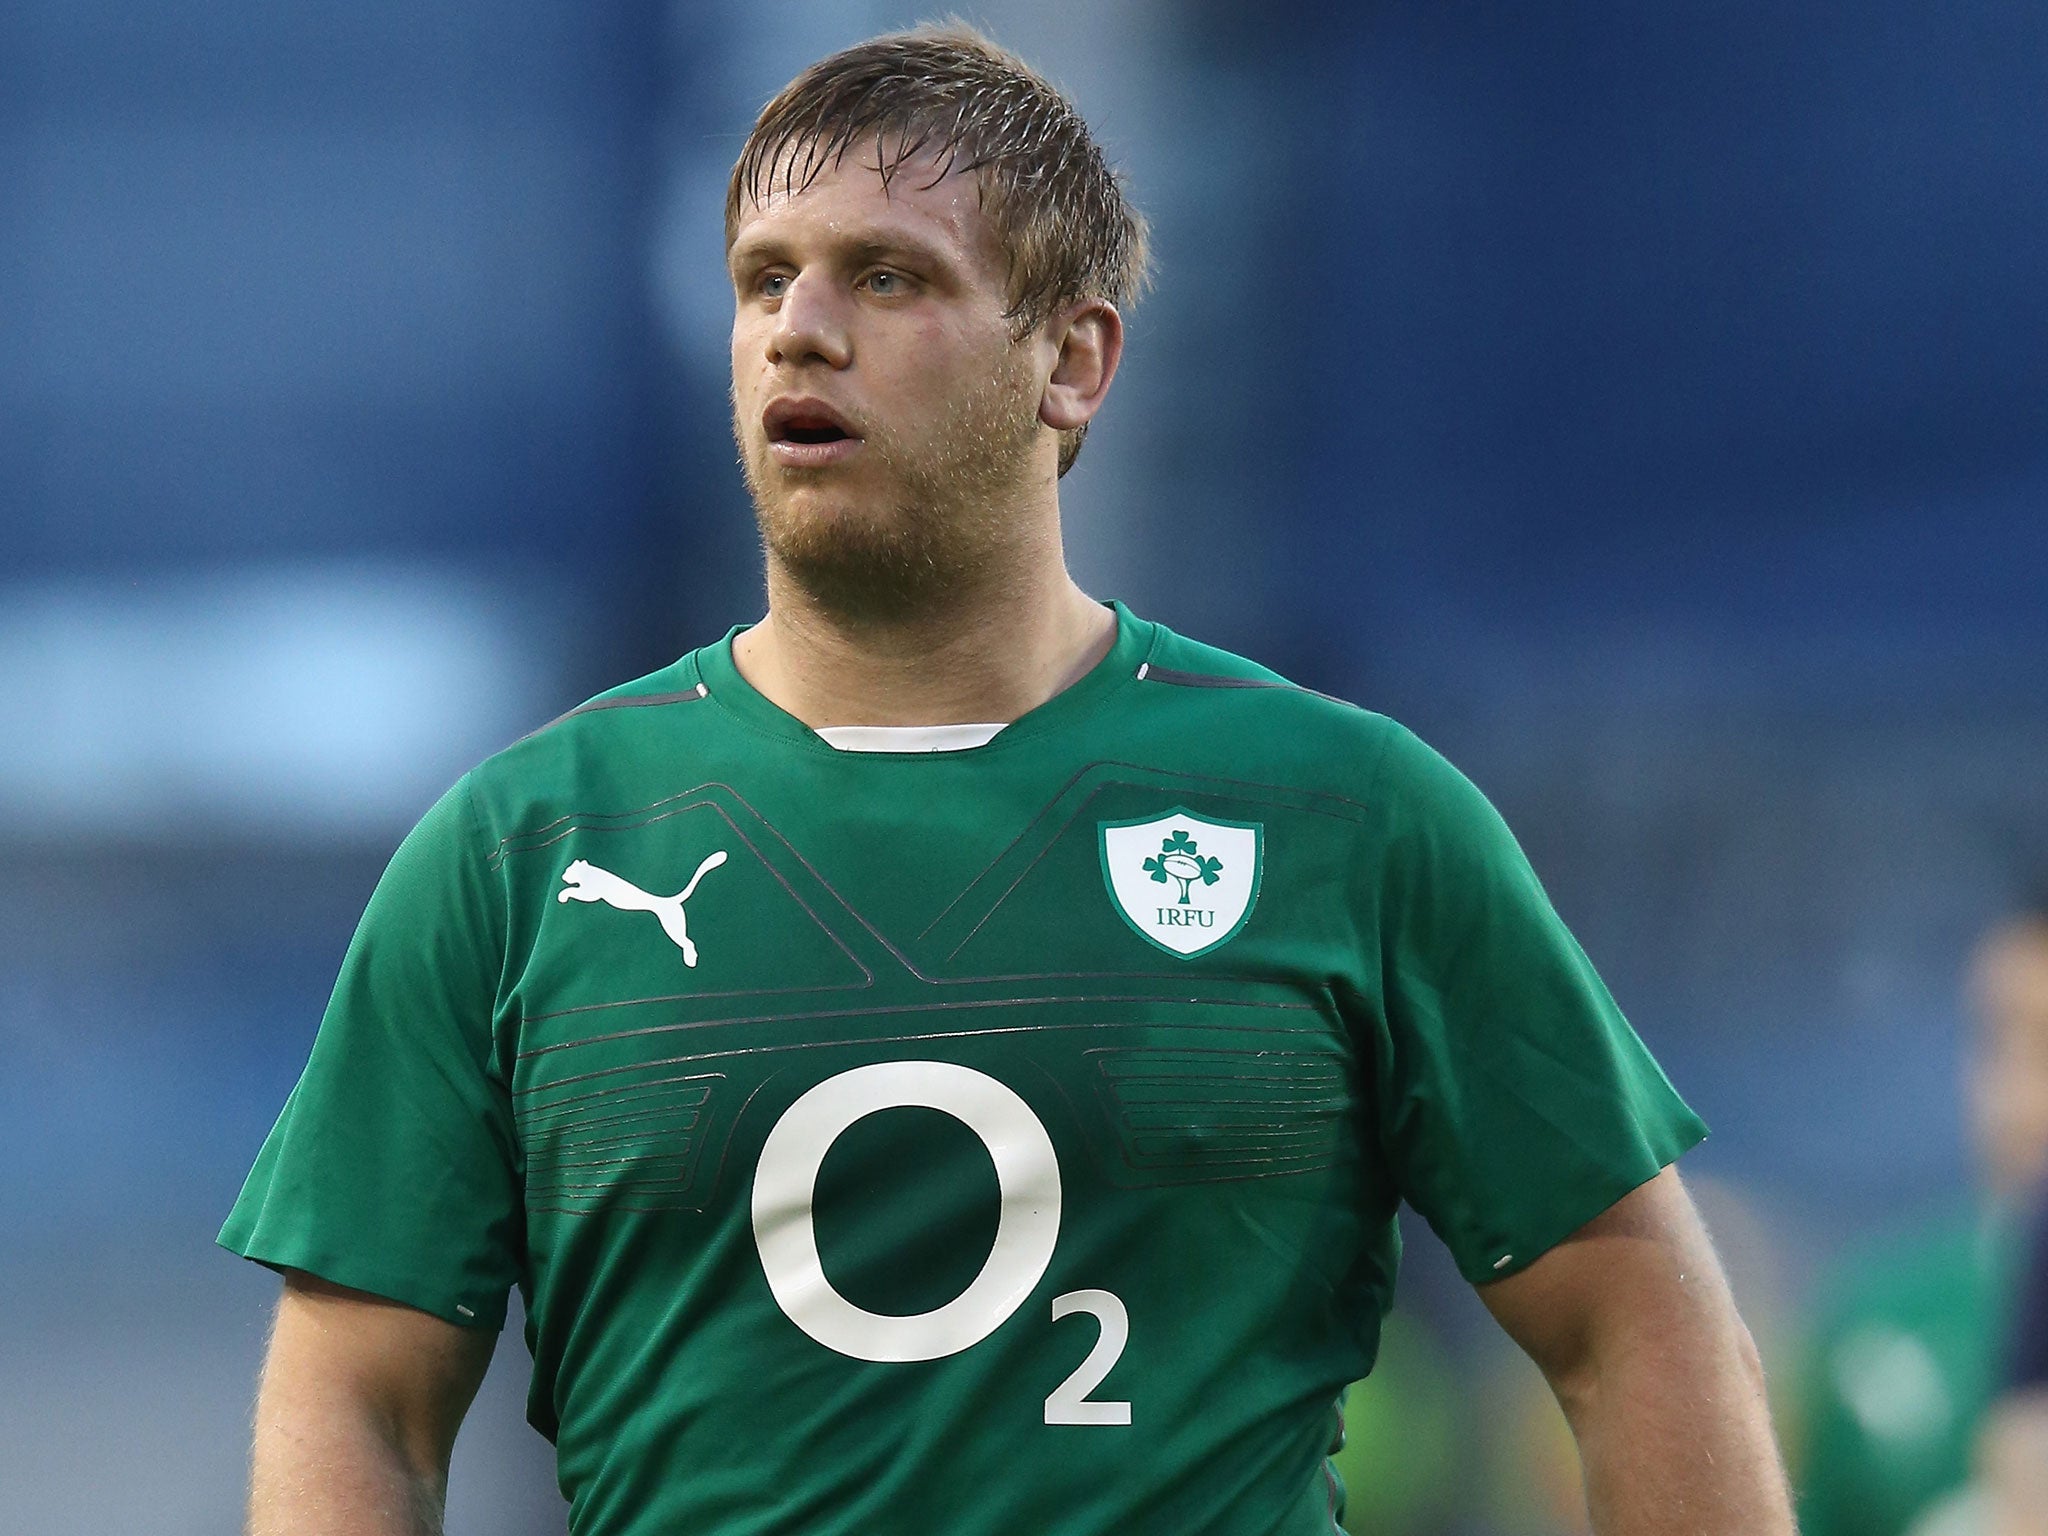 Chris Henry in action for Ireland against Scotland in the 2014 Six Nations